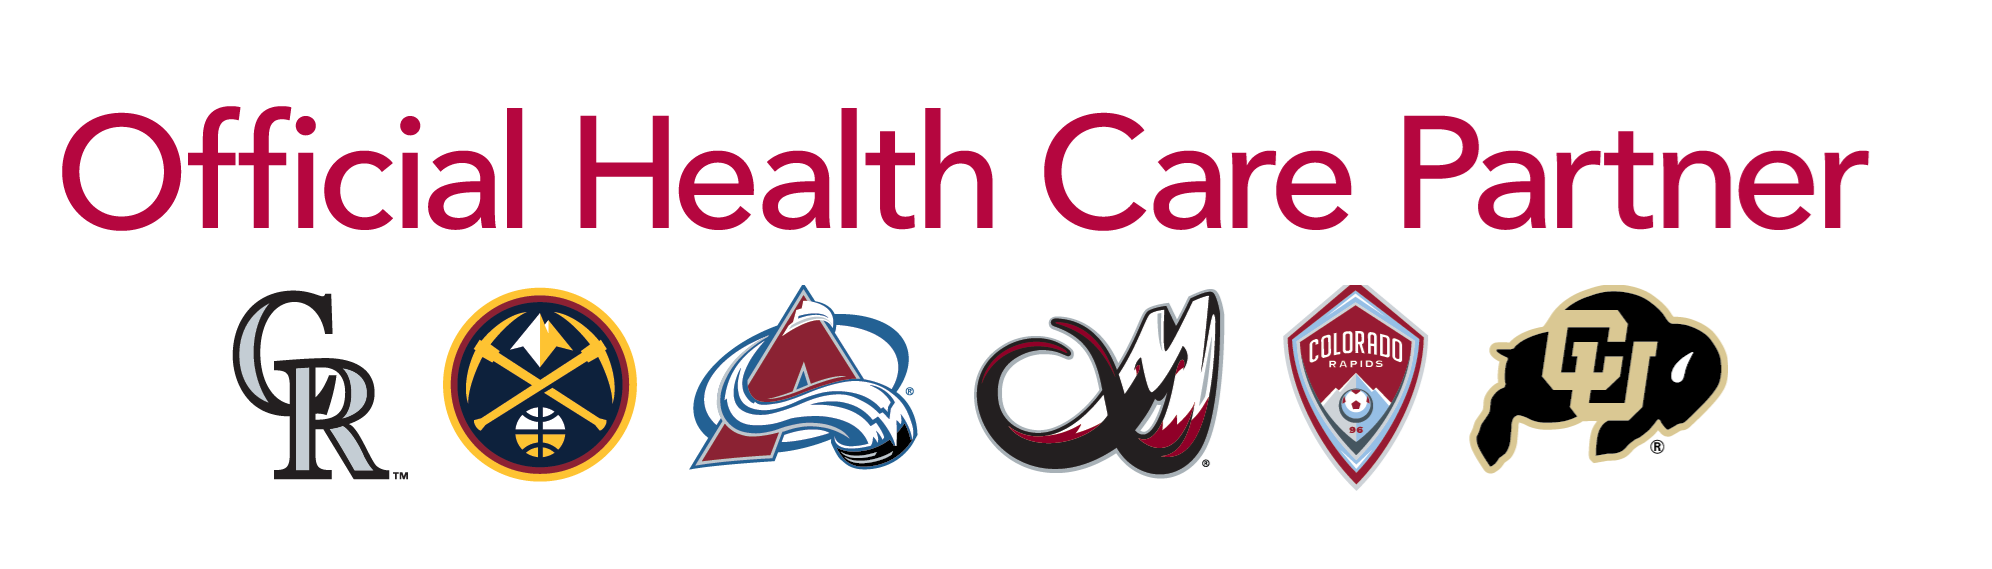 Official Health Care Partner